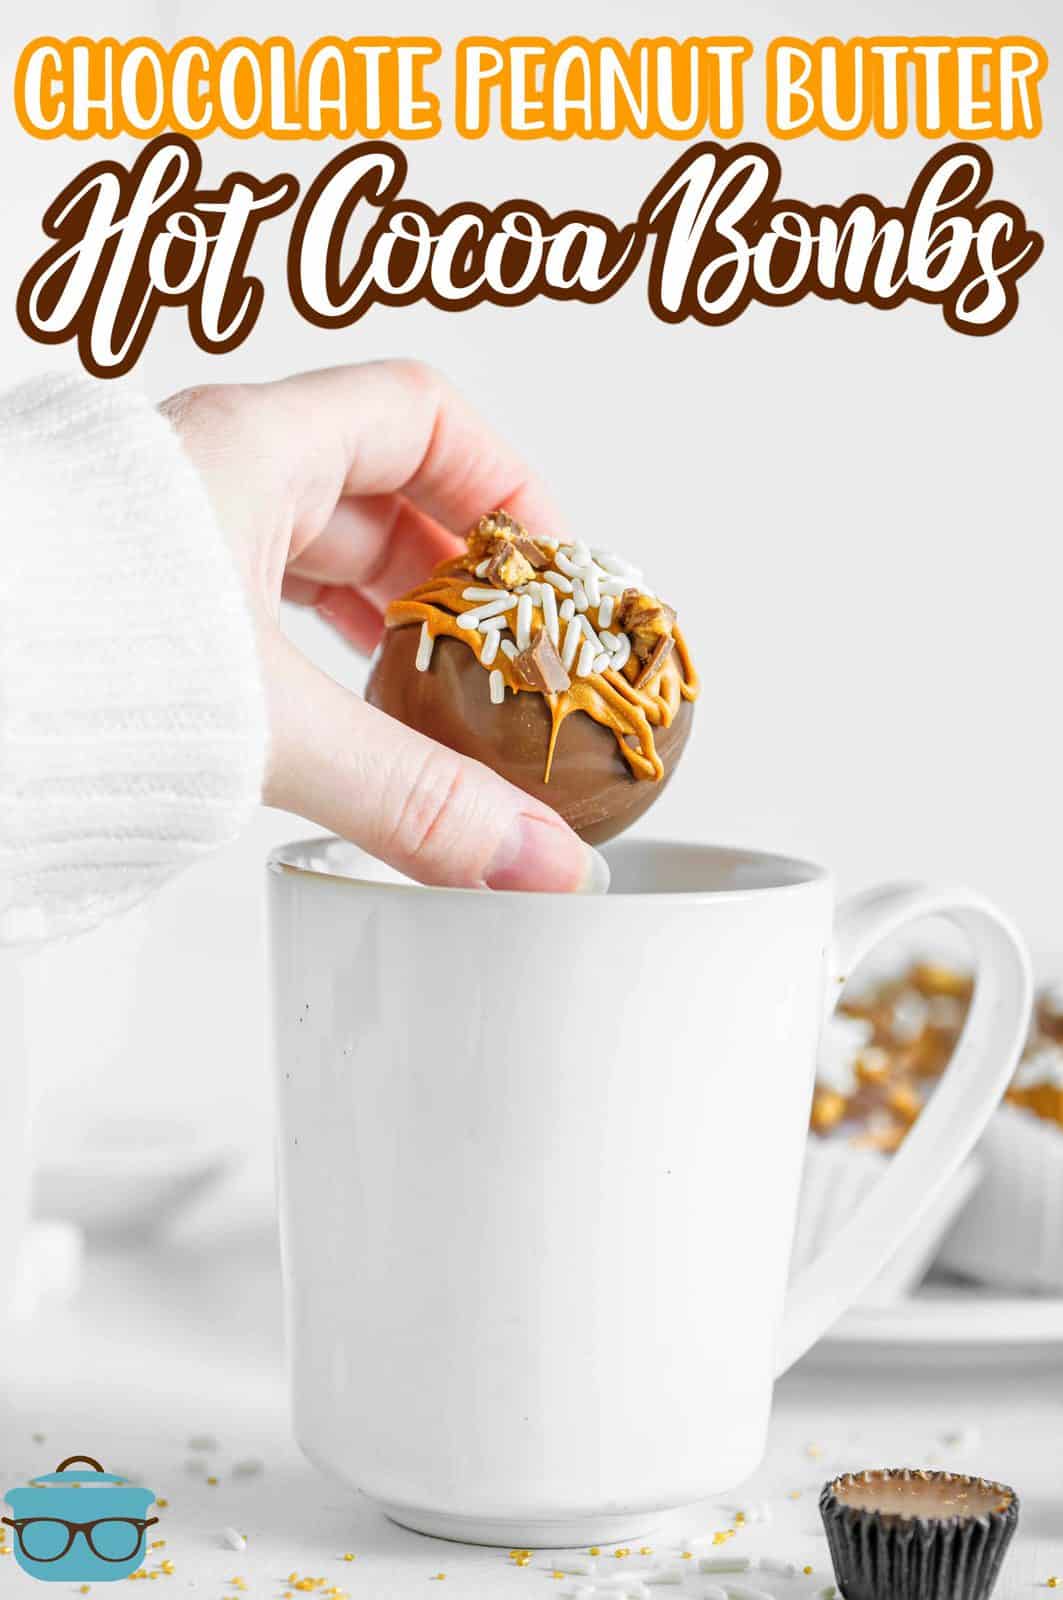 Pinterest image showing hand placing one Chocolate Peanut Butter Hot Cocoa Bombs into white mug.